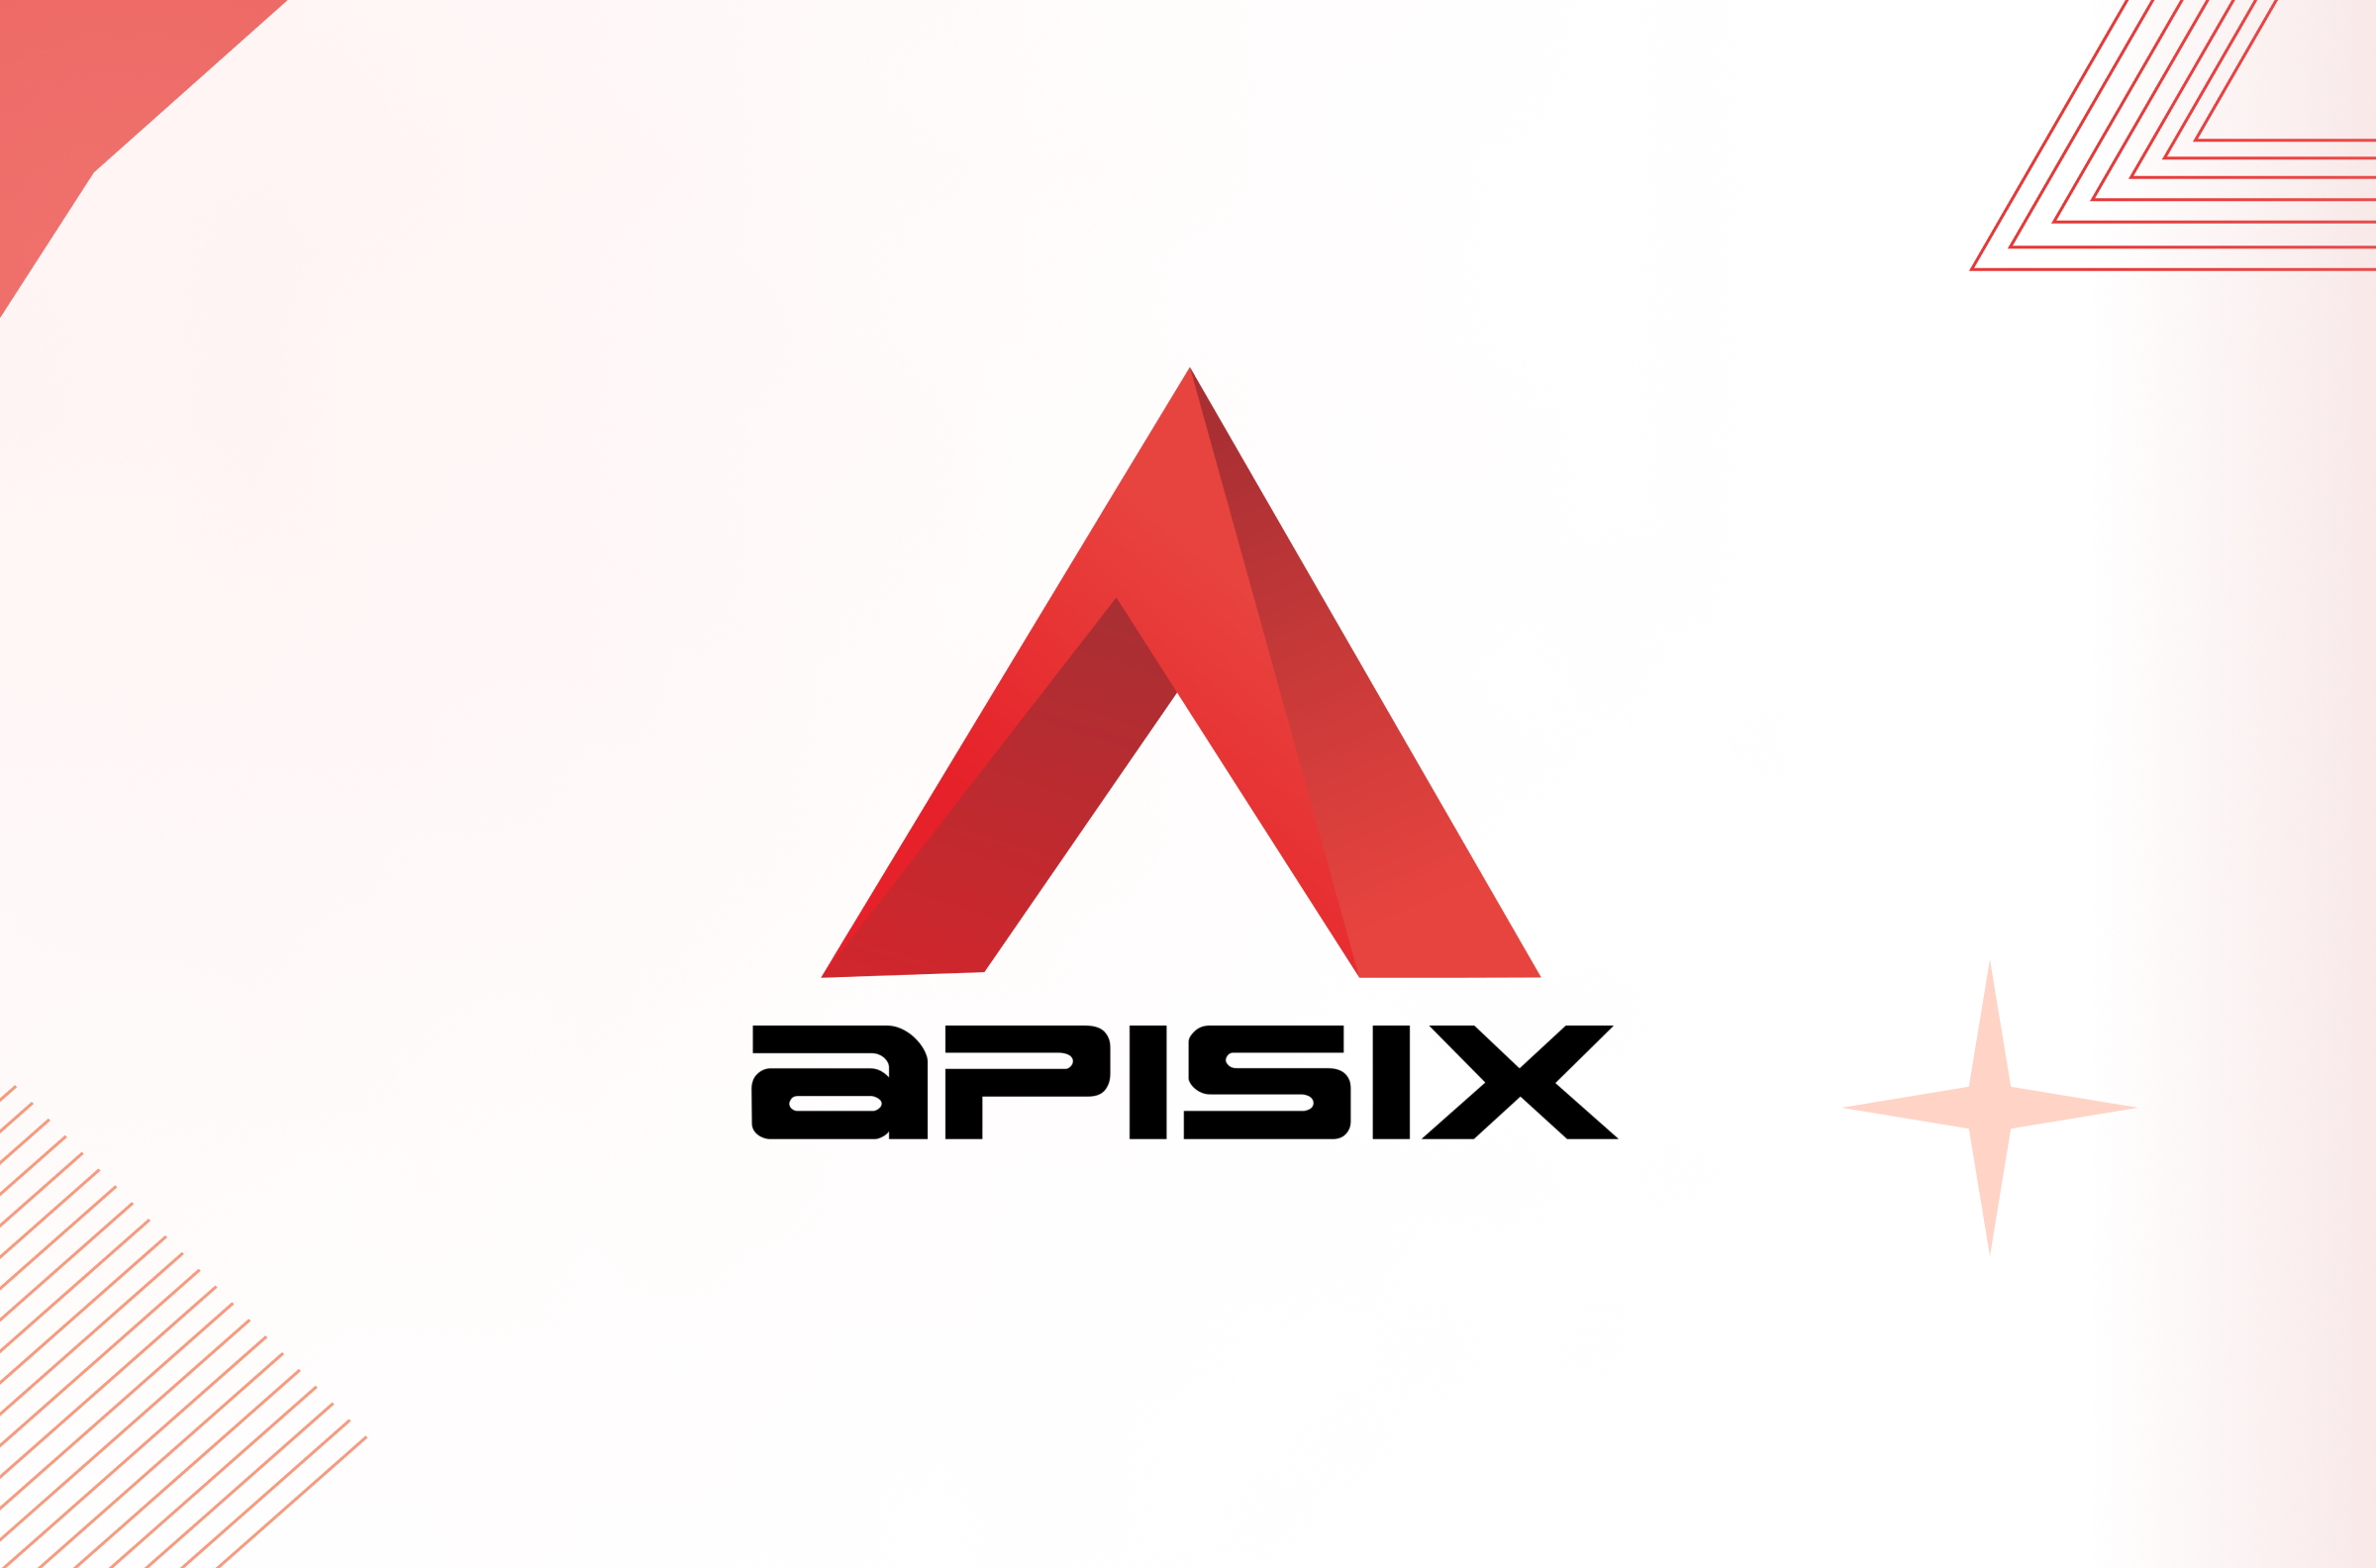 Originally created by API7.ai, APISIX was open-sourced and donated to Apache Software Foundation in 2019, making the vision of serving half of the wor